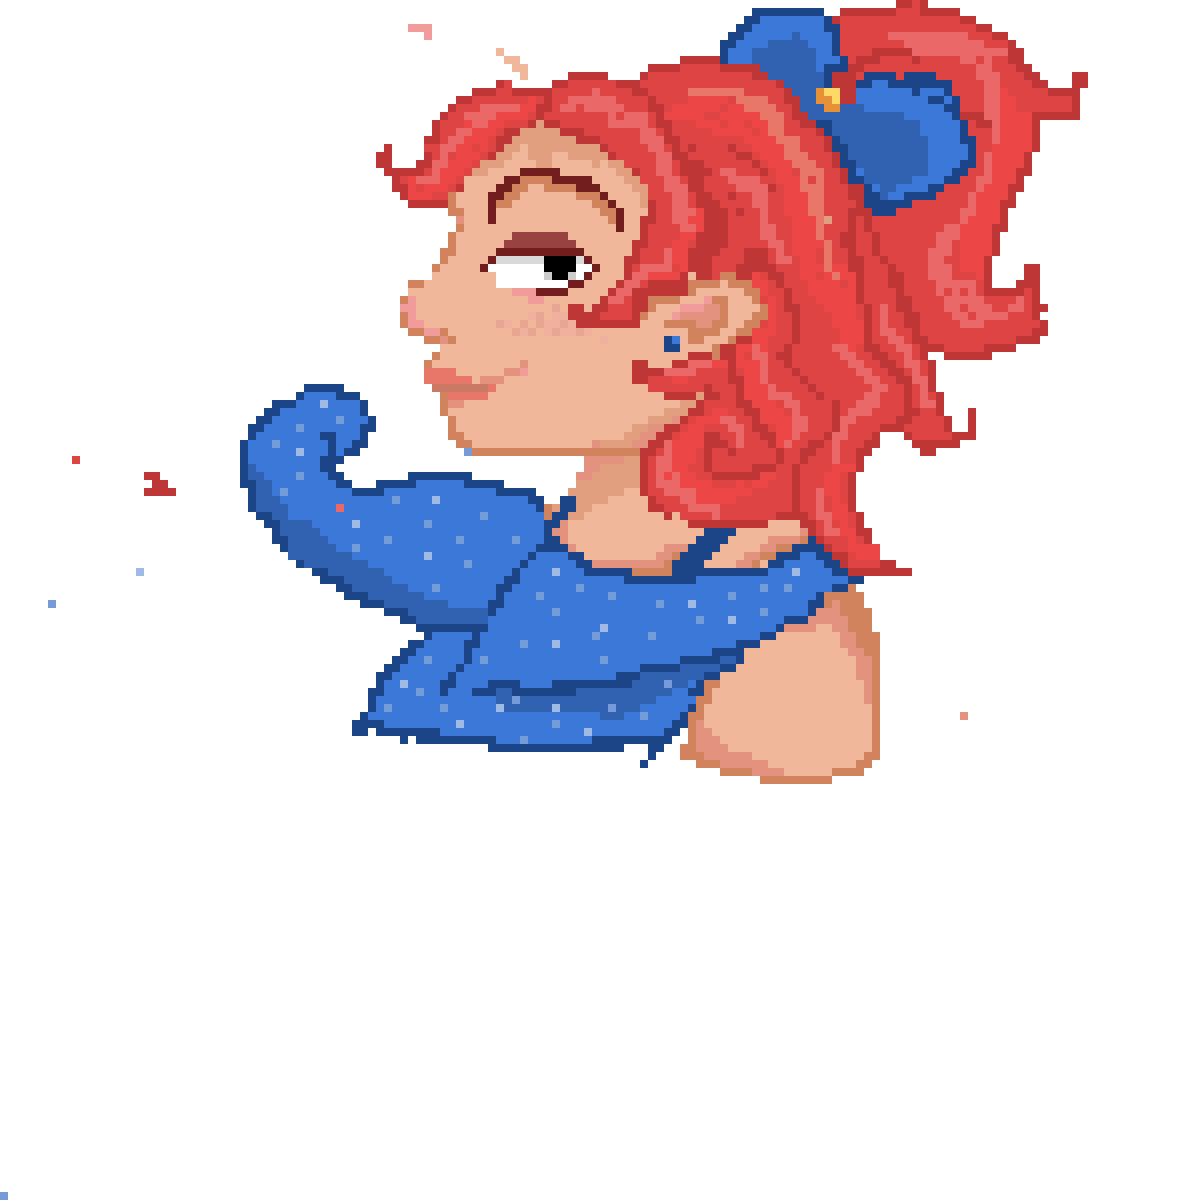 Sandy Sprite- Calico Desert, Stardew Valley-Tysm ConcernedApe for your efforts on this awesome game!